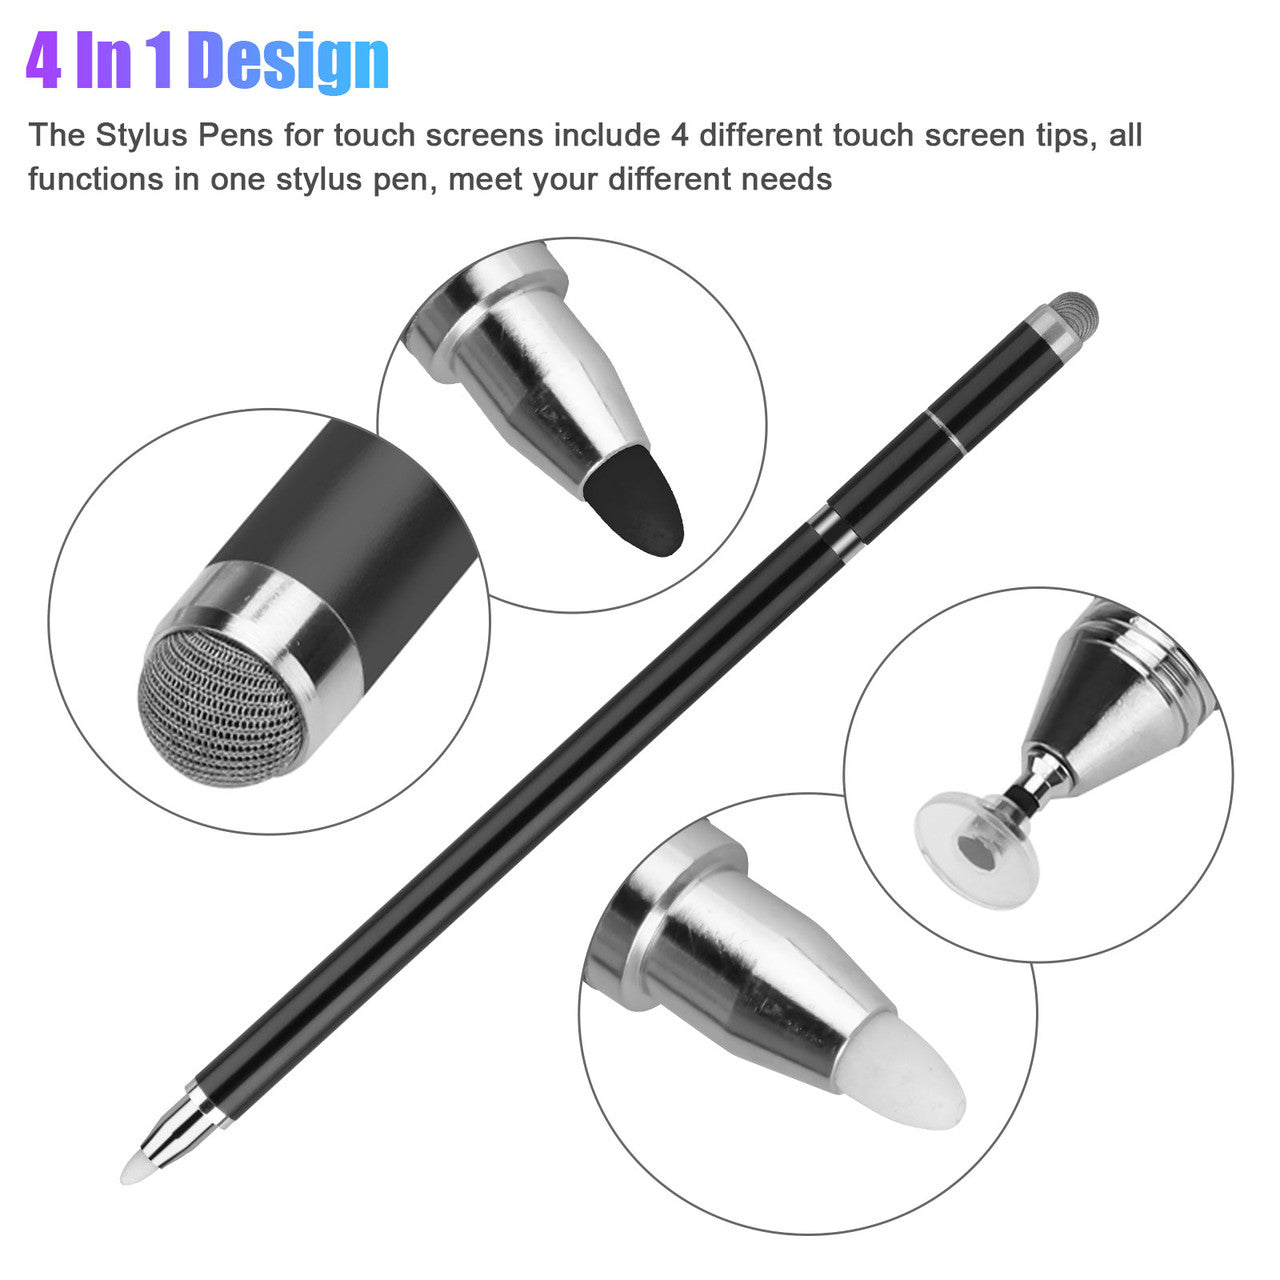 Universal Capacitive Stylus Pens, High Sensitivity and Precision for iPhone Samsung, Black